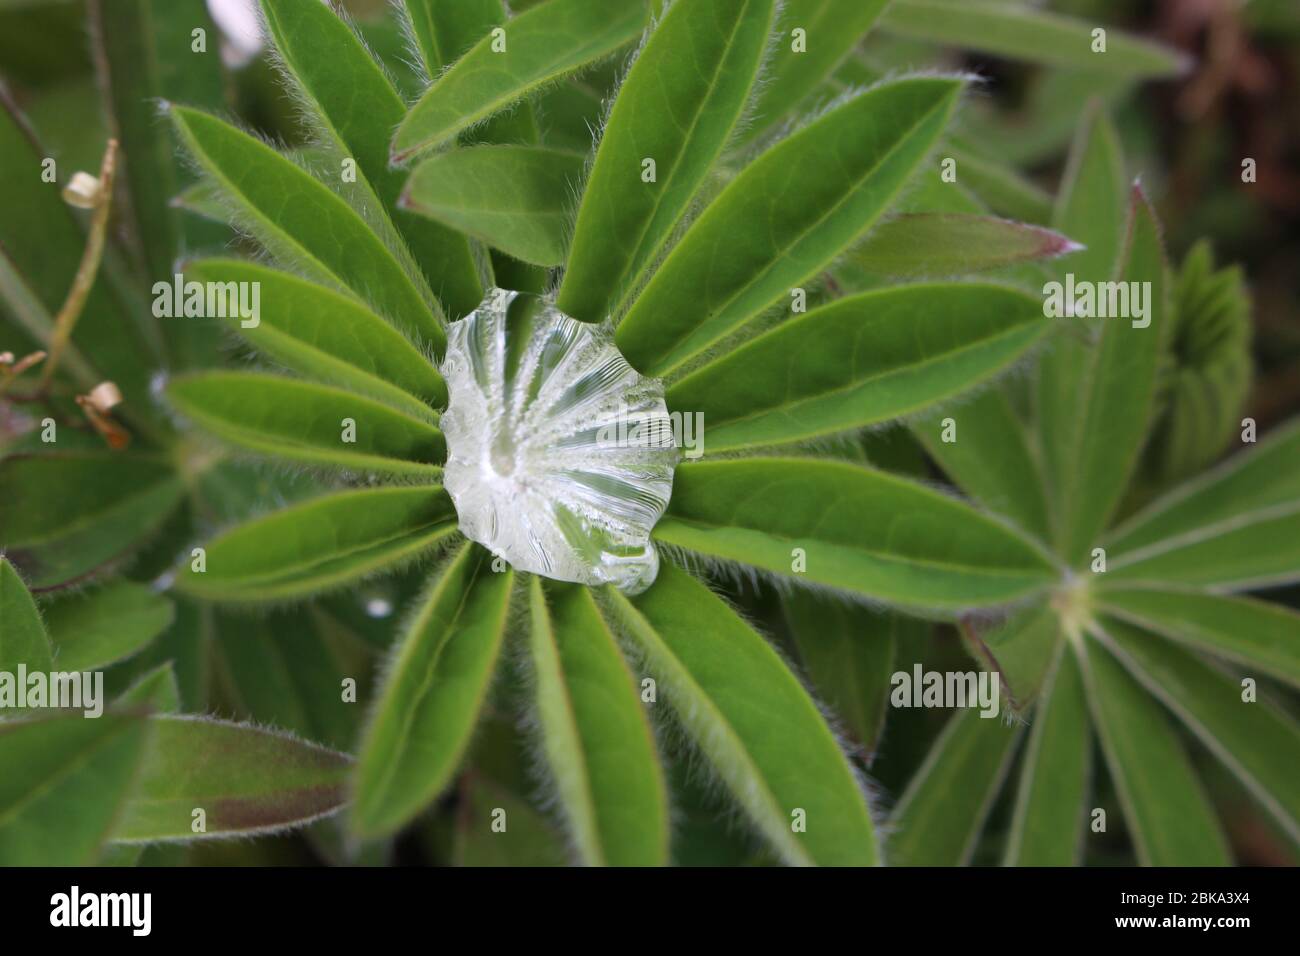 A close up photograph of a diamond-shaped droplet of rain water in the middle of a young lupin plant's leaves. Stock Photo